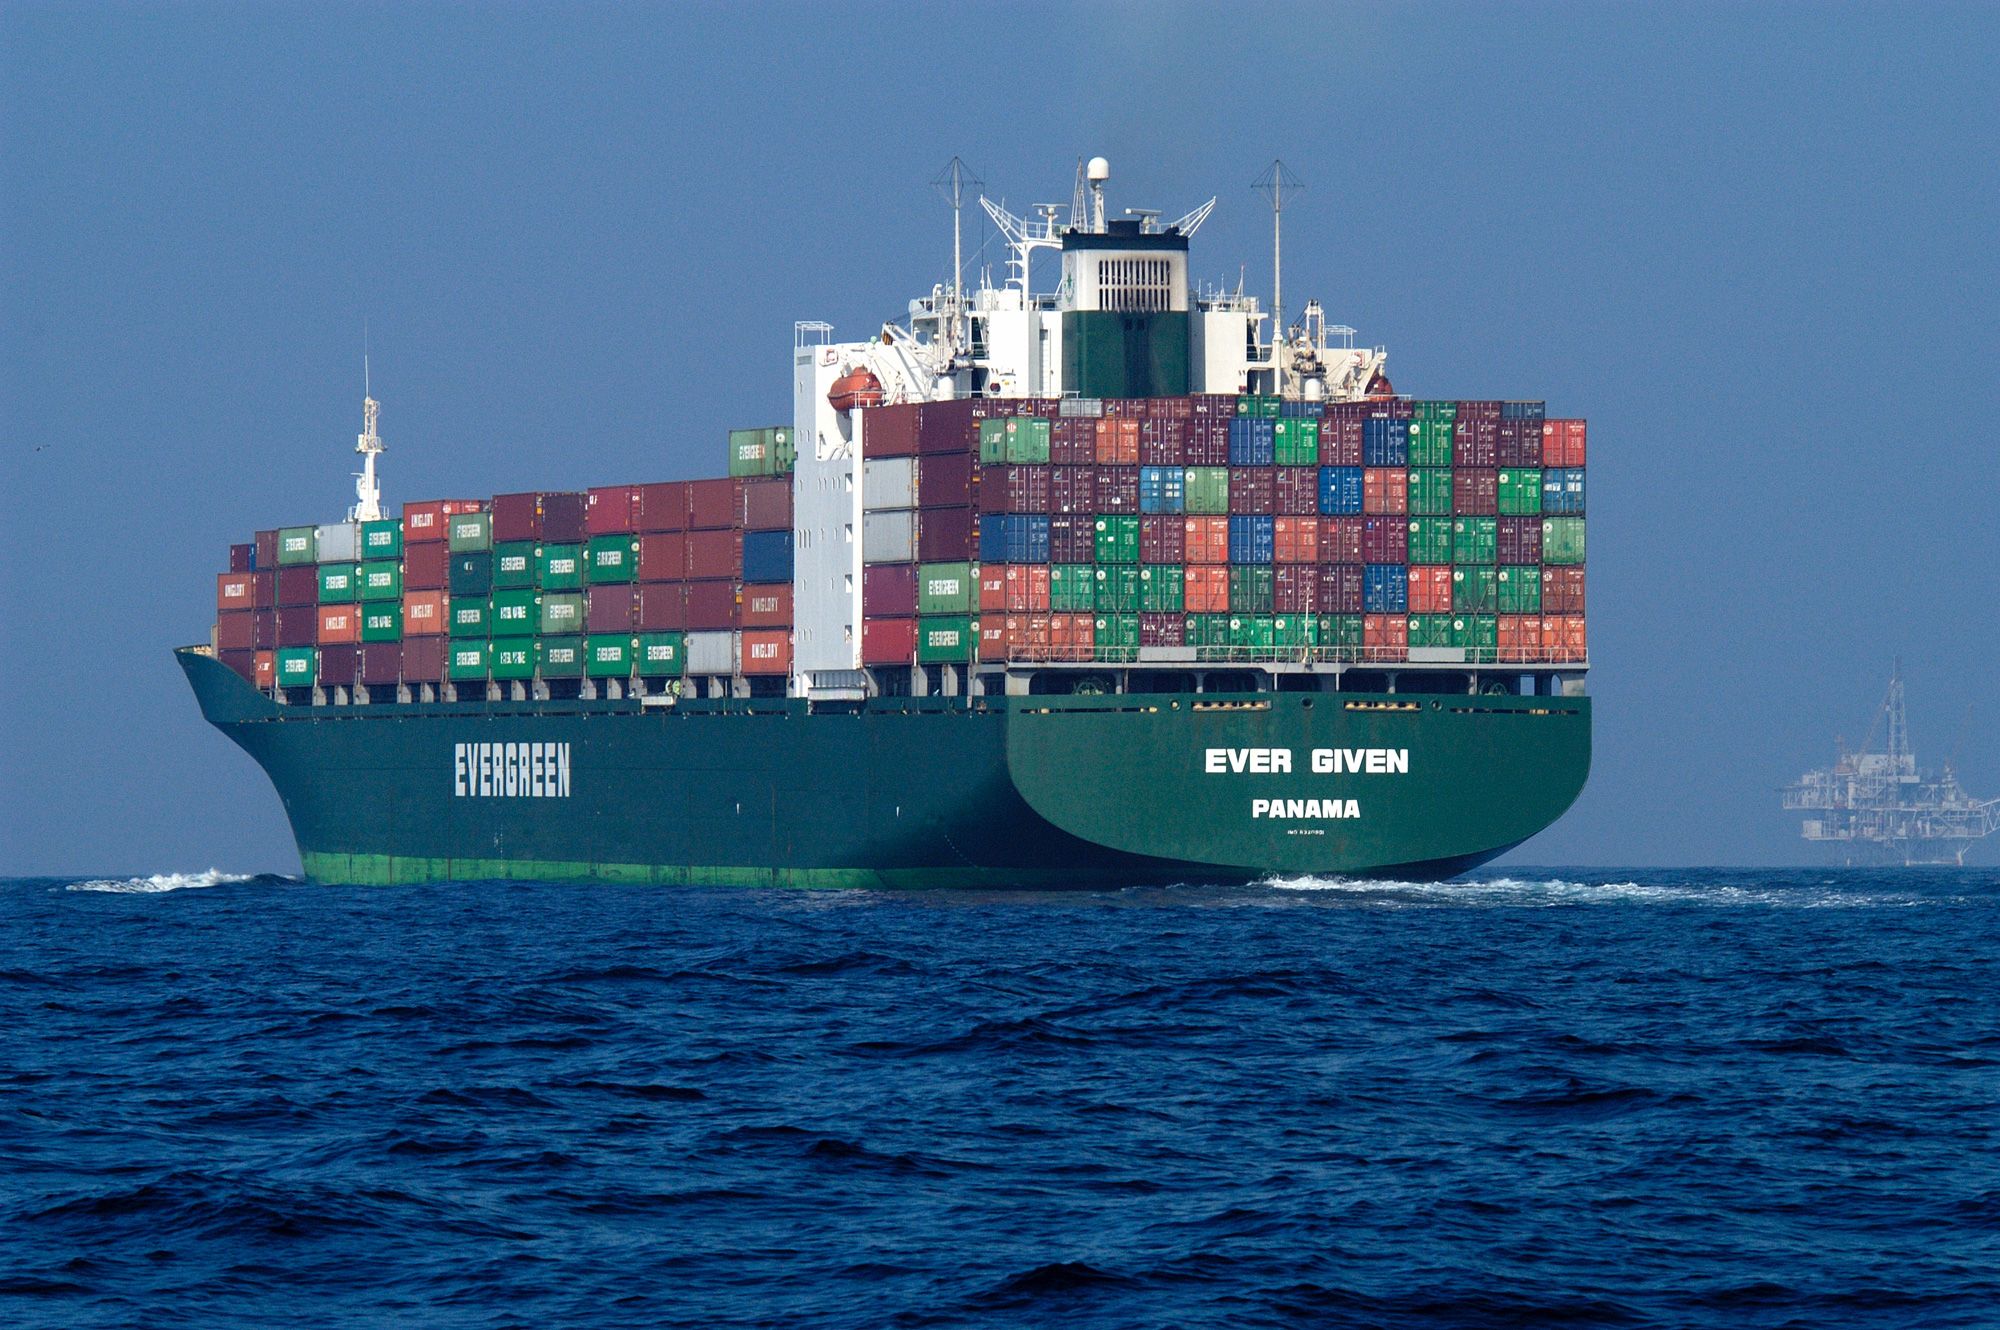 A ship with many containers makes its way across the water.